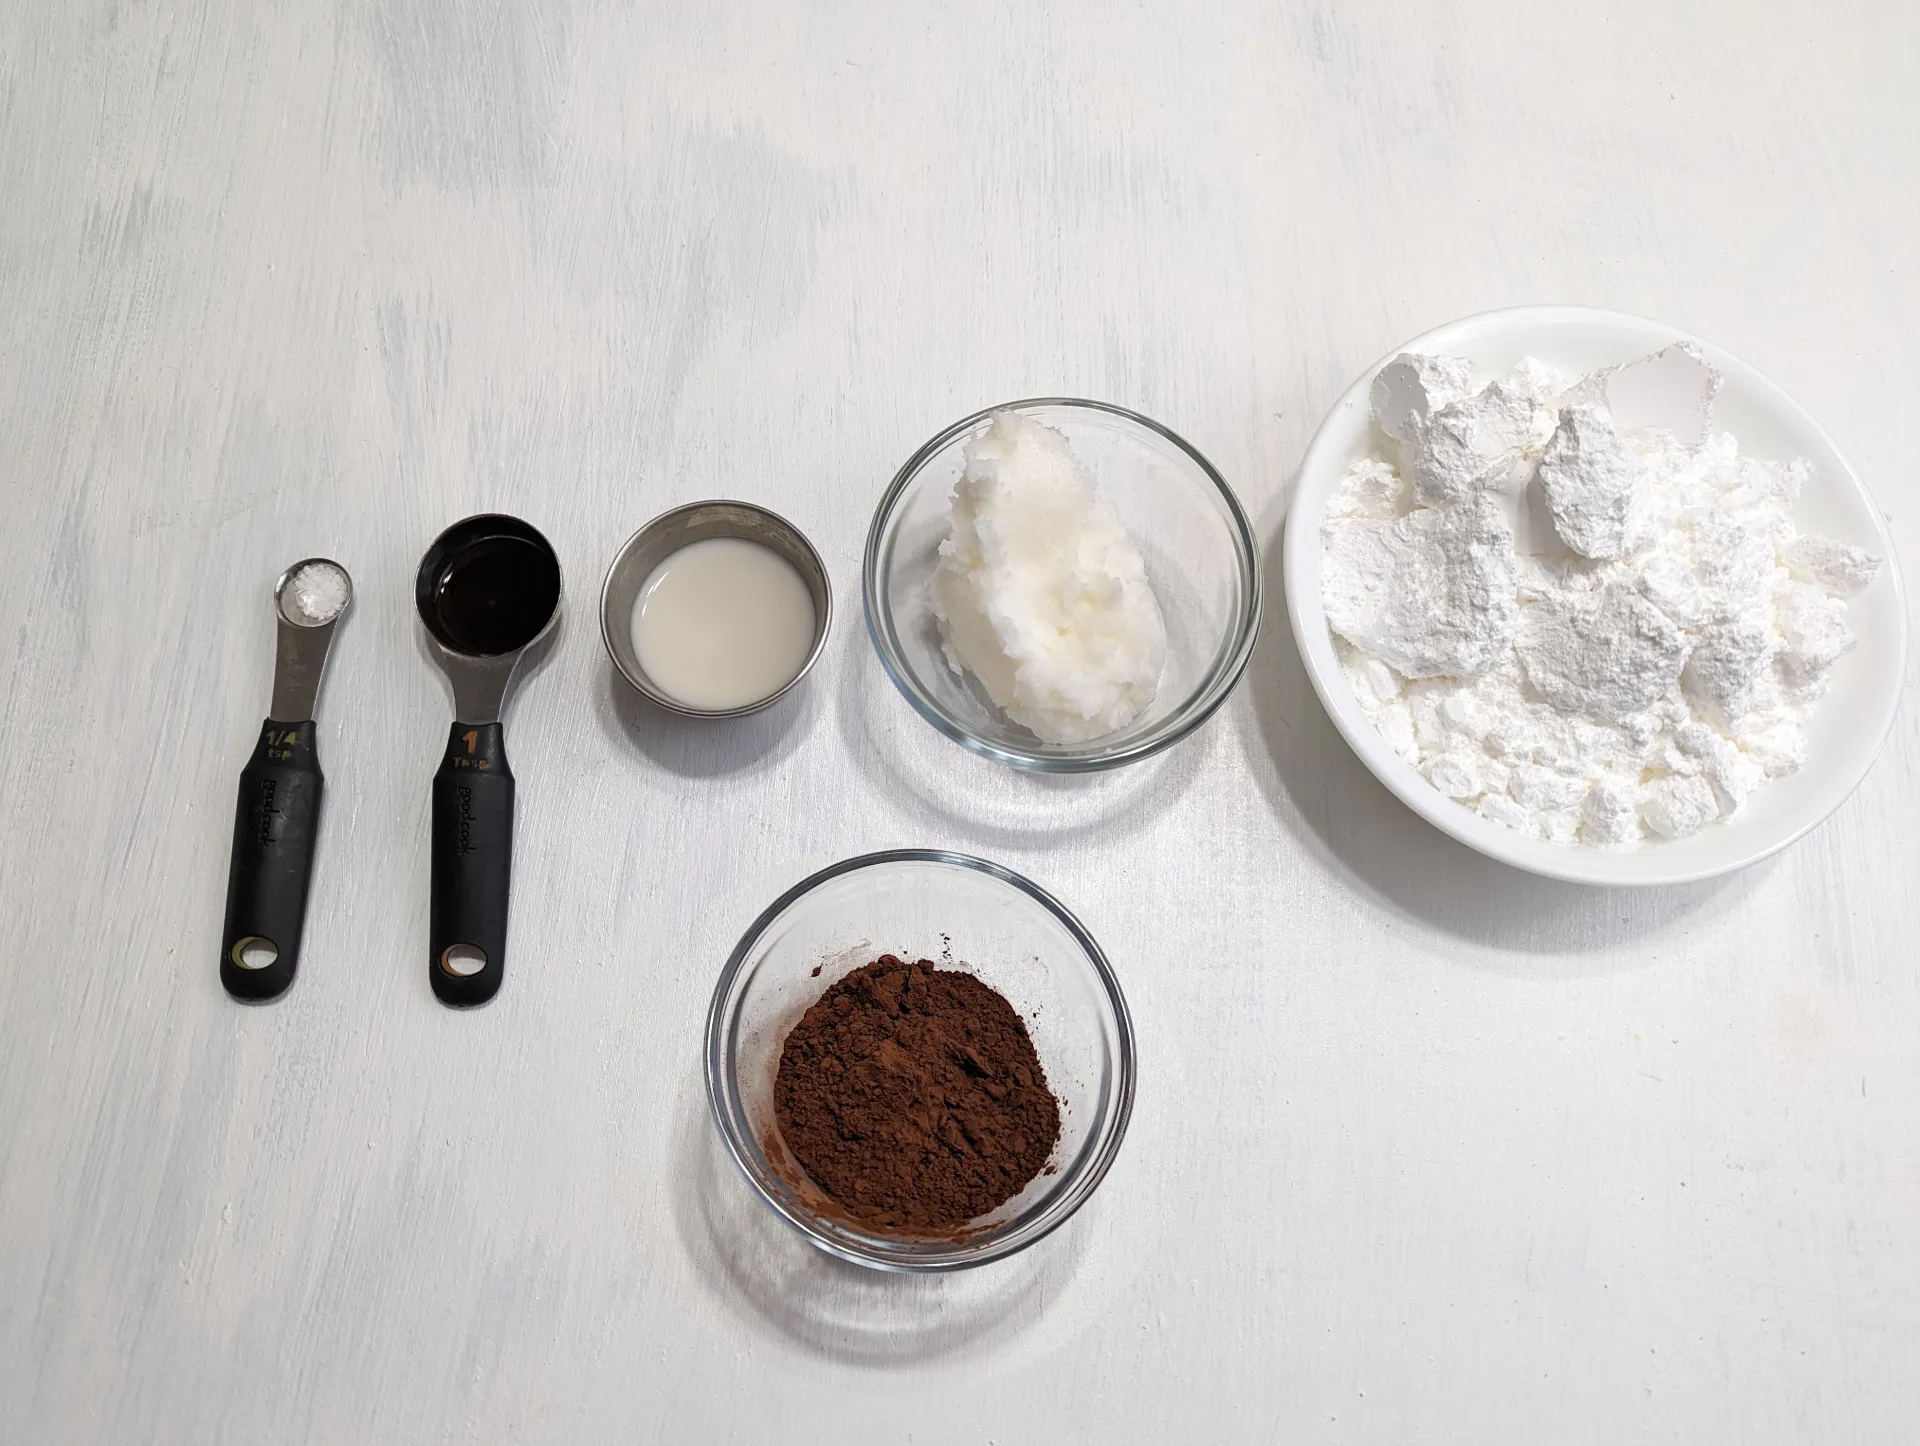 An image of the frosting ingredients; salt, vanilla, almond milk, cocoa powder, coconut oil, and powdered sugar